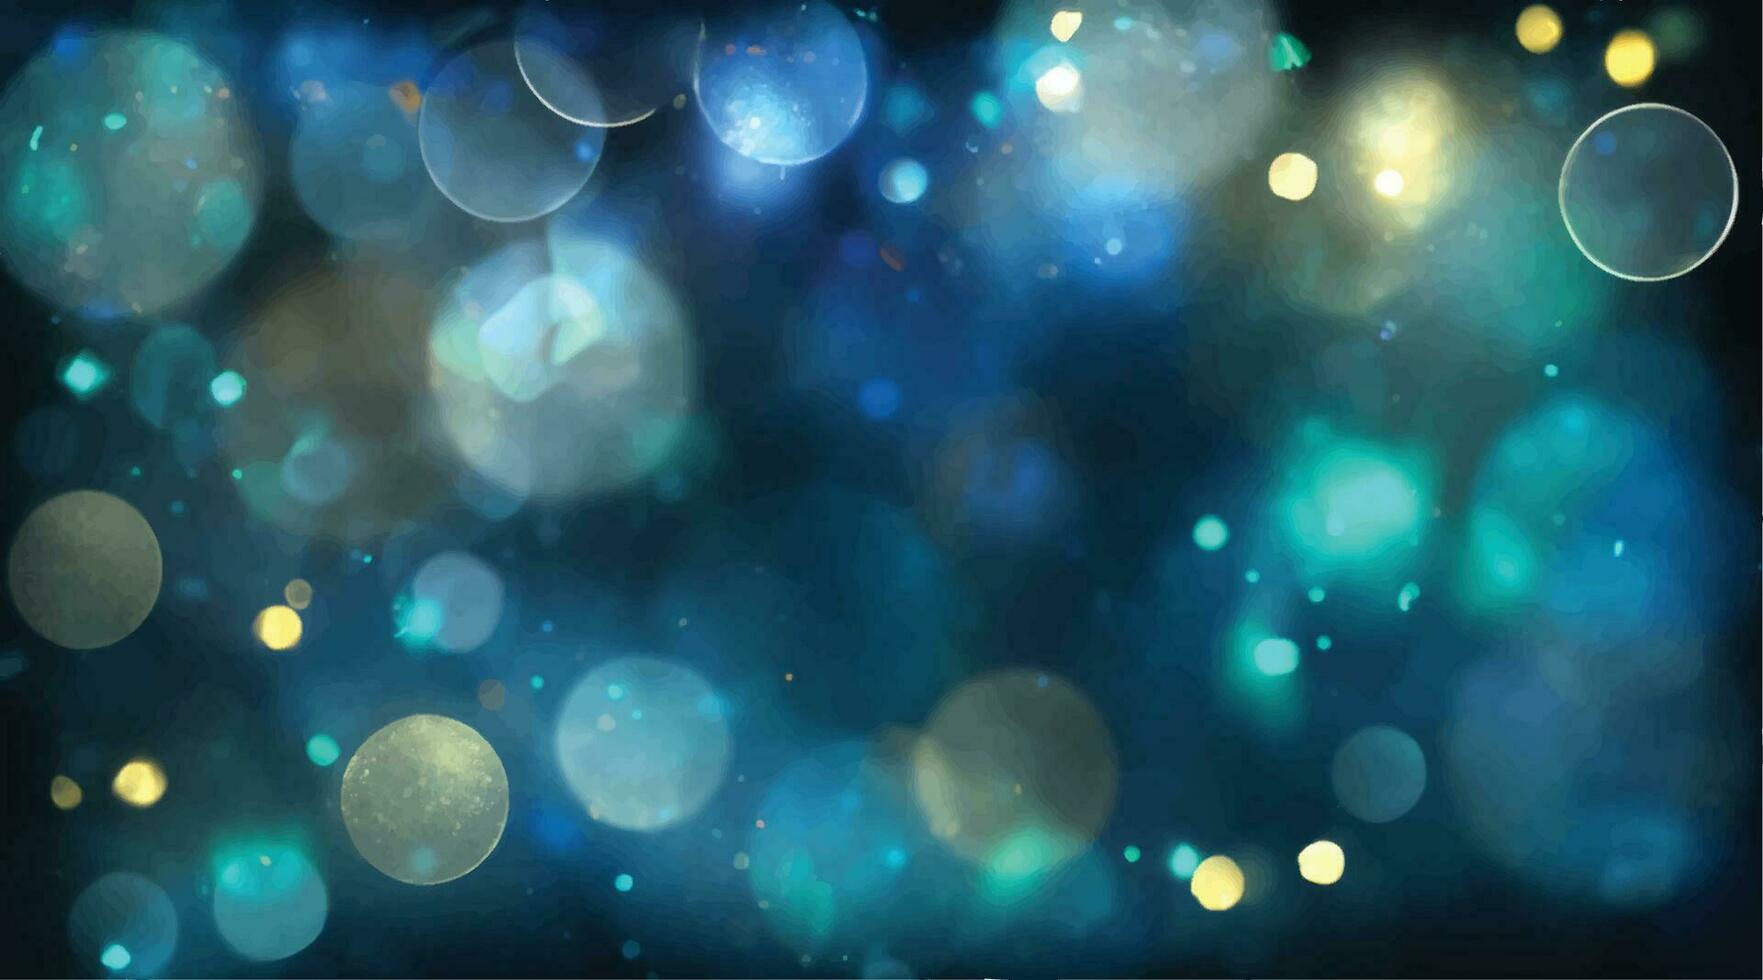 background of abstract glitter lights. blue, gold and black. de focused. vector